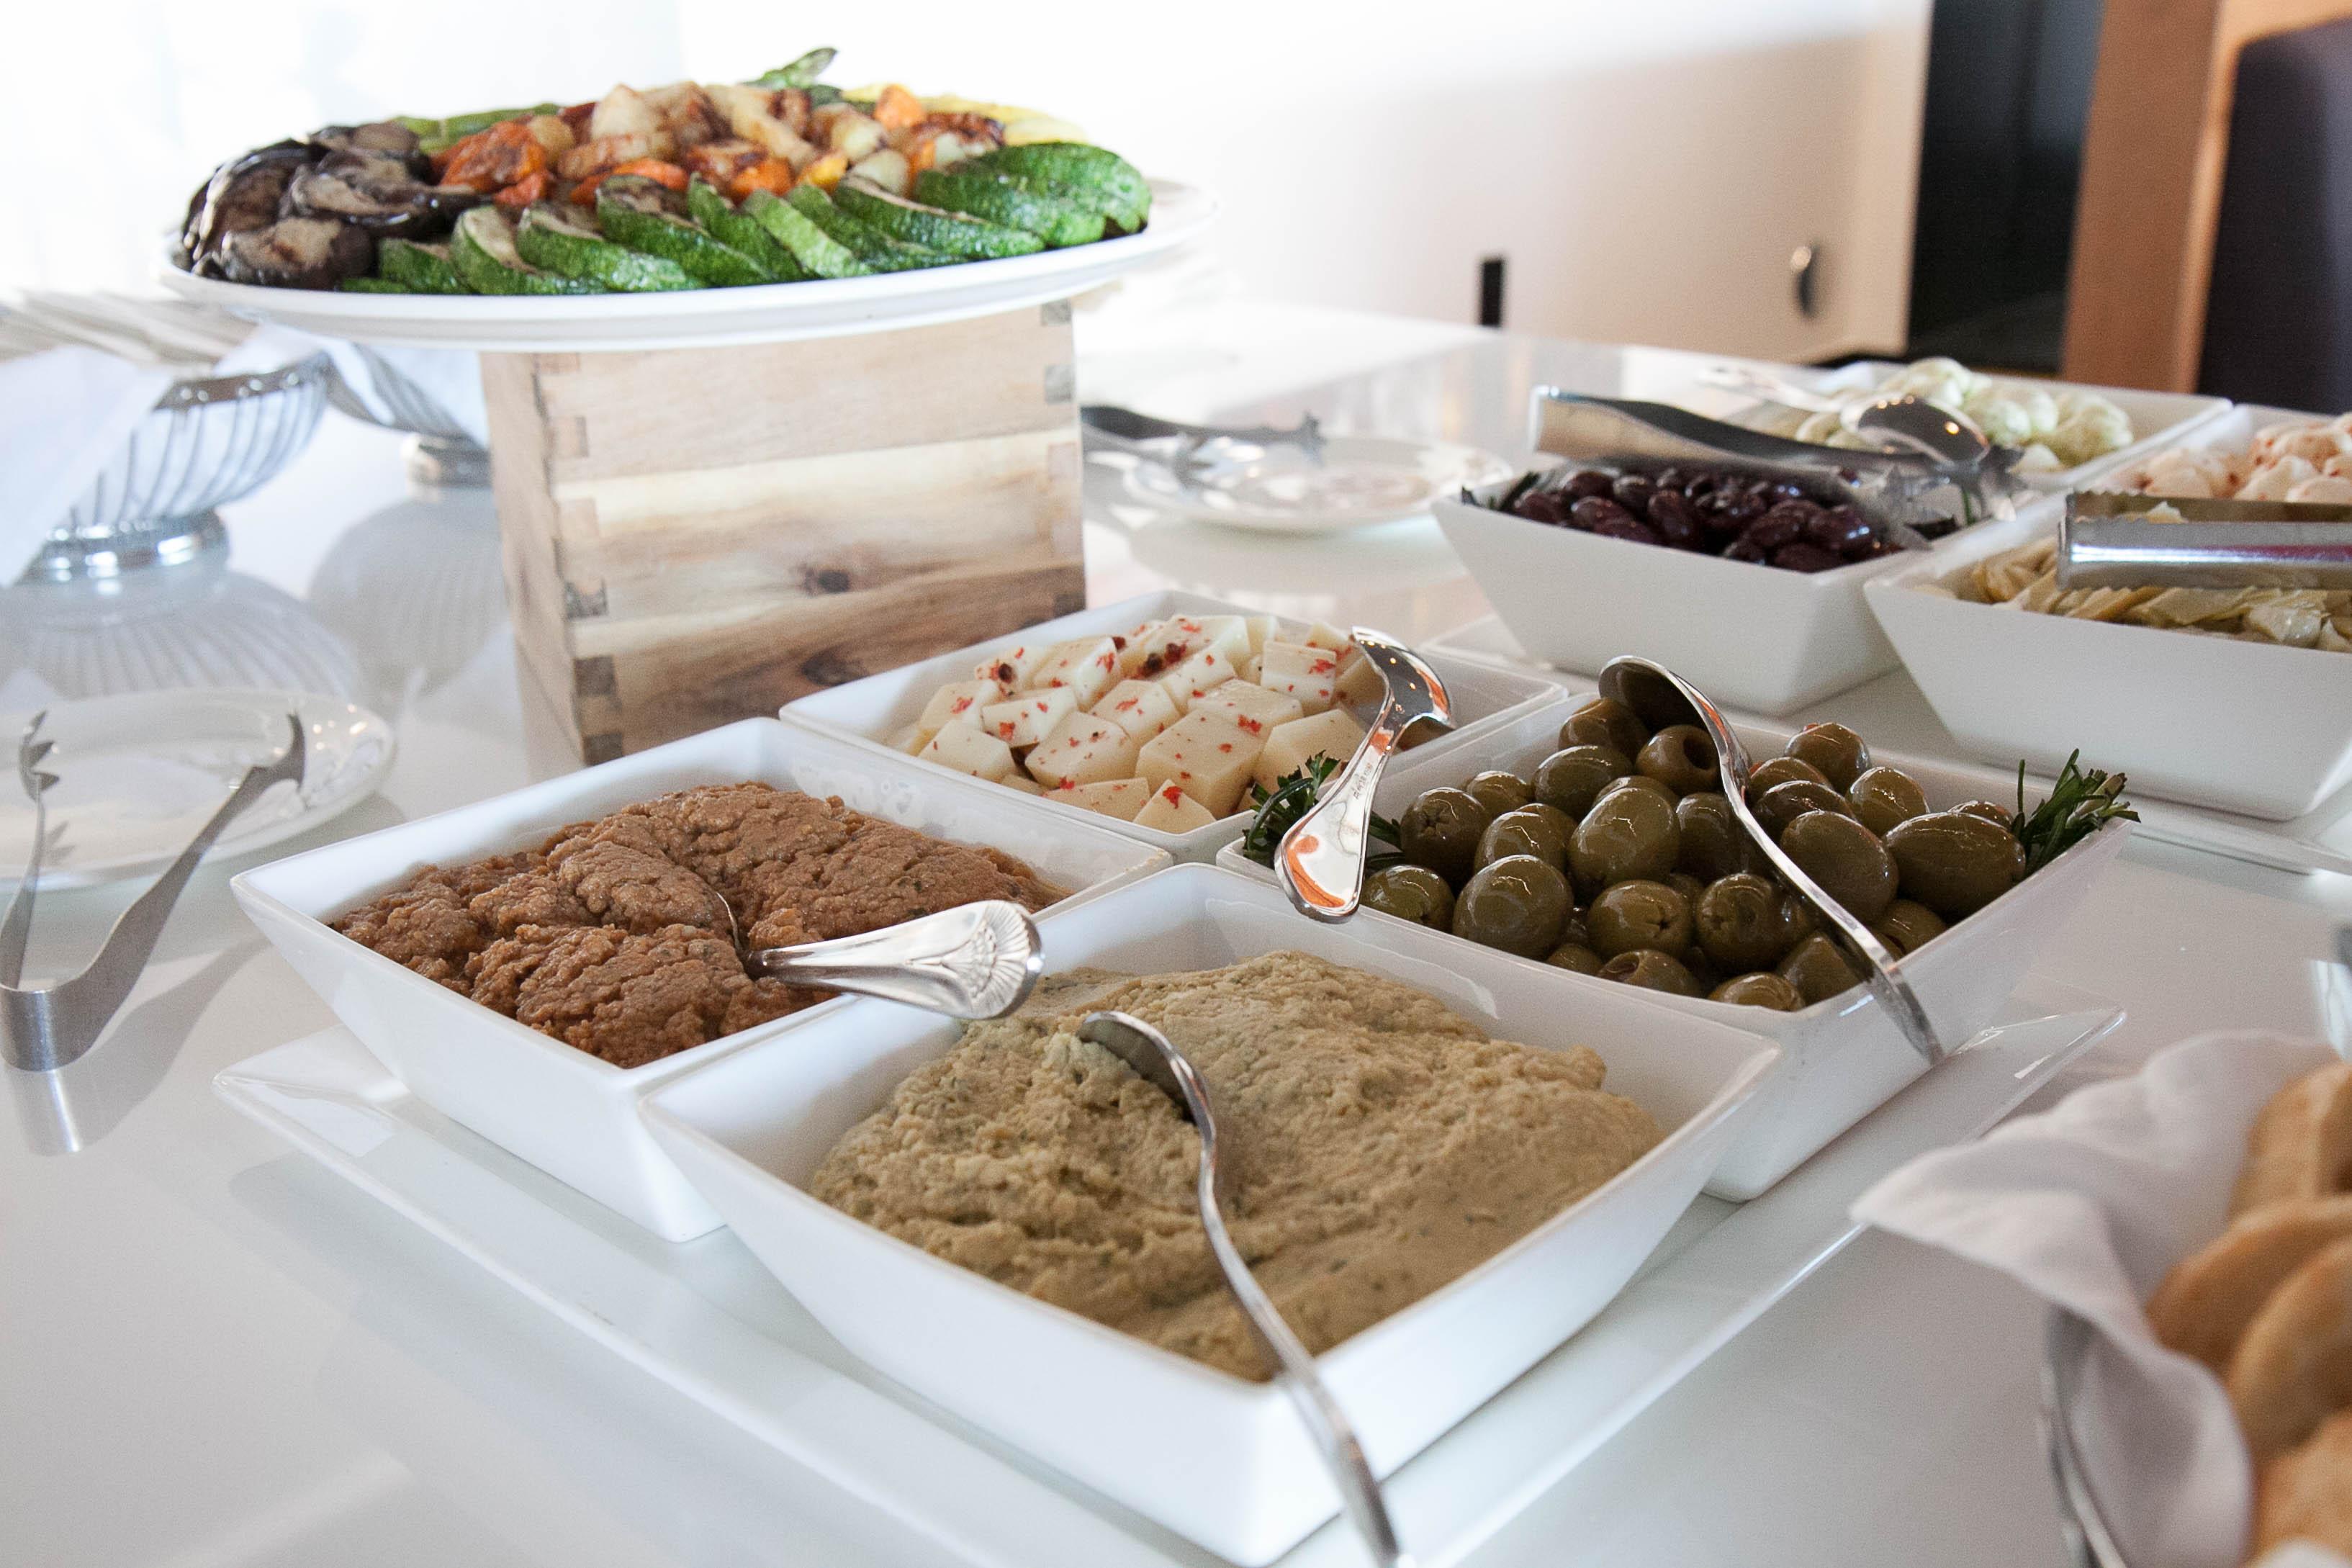 Different food options prepared by Good Tidings Catering